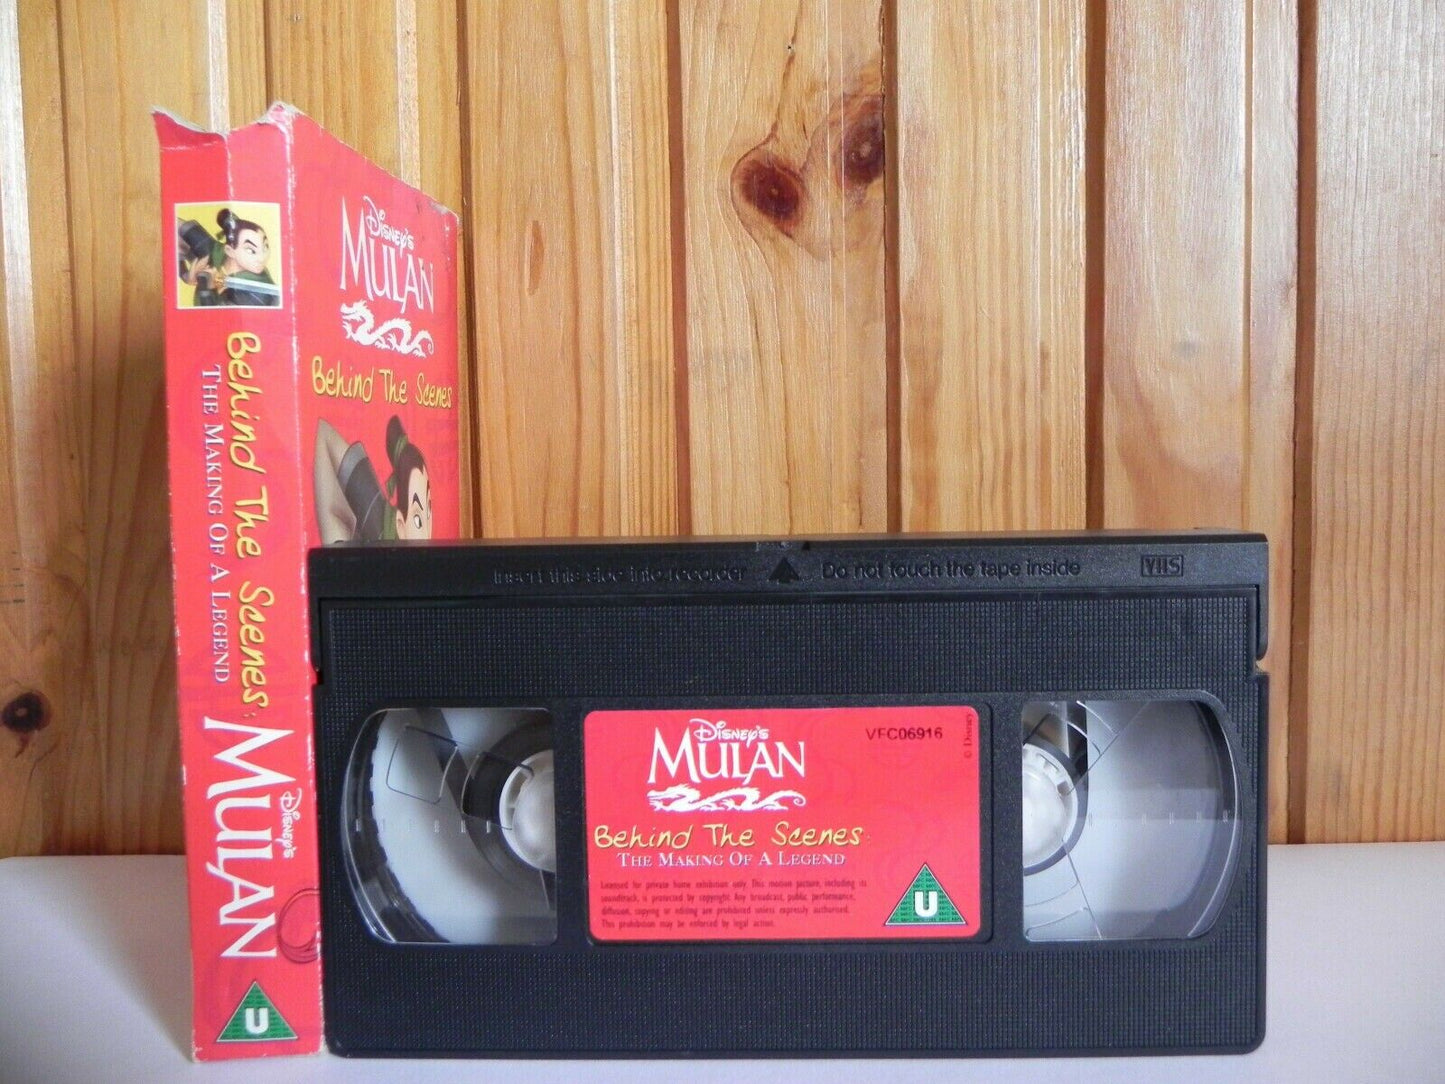 Mulan: Behind The Scenes - Disney - Carton Box - The Making Of A Legend - VHS-